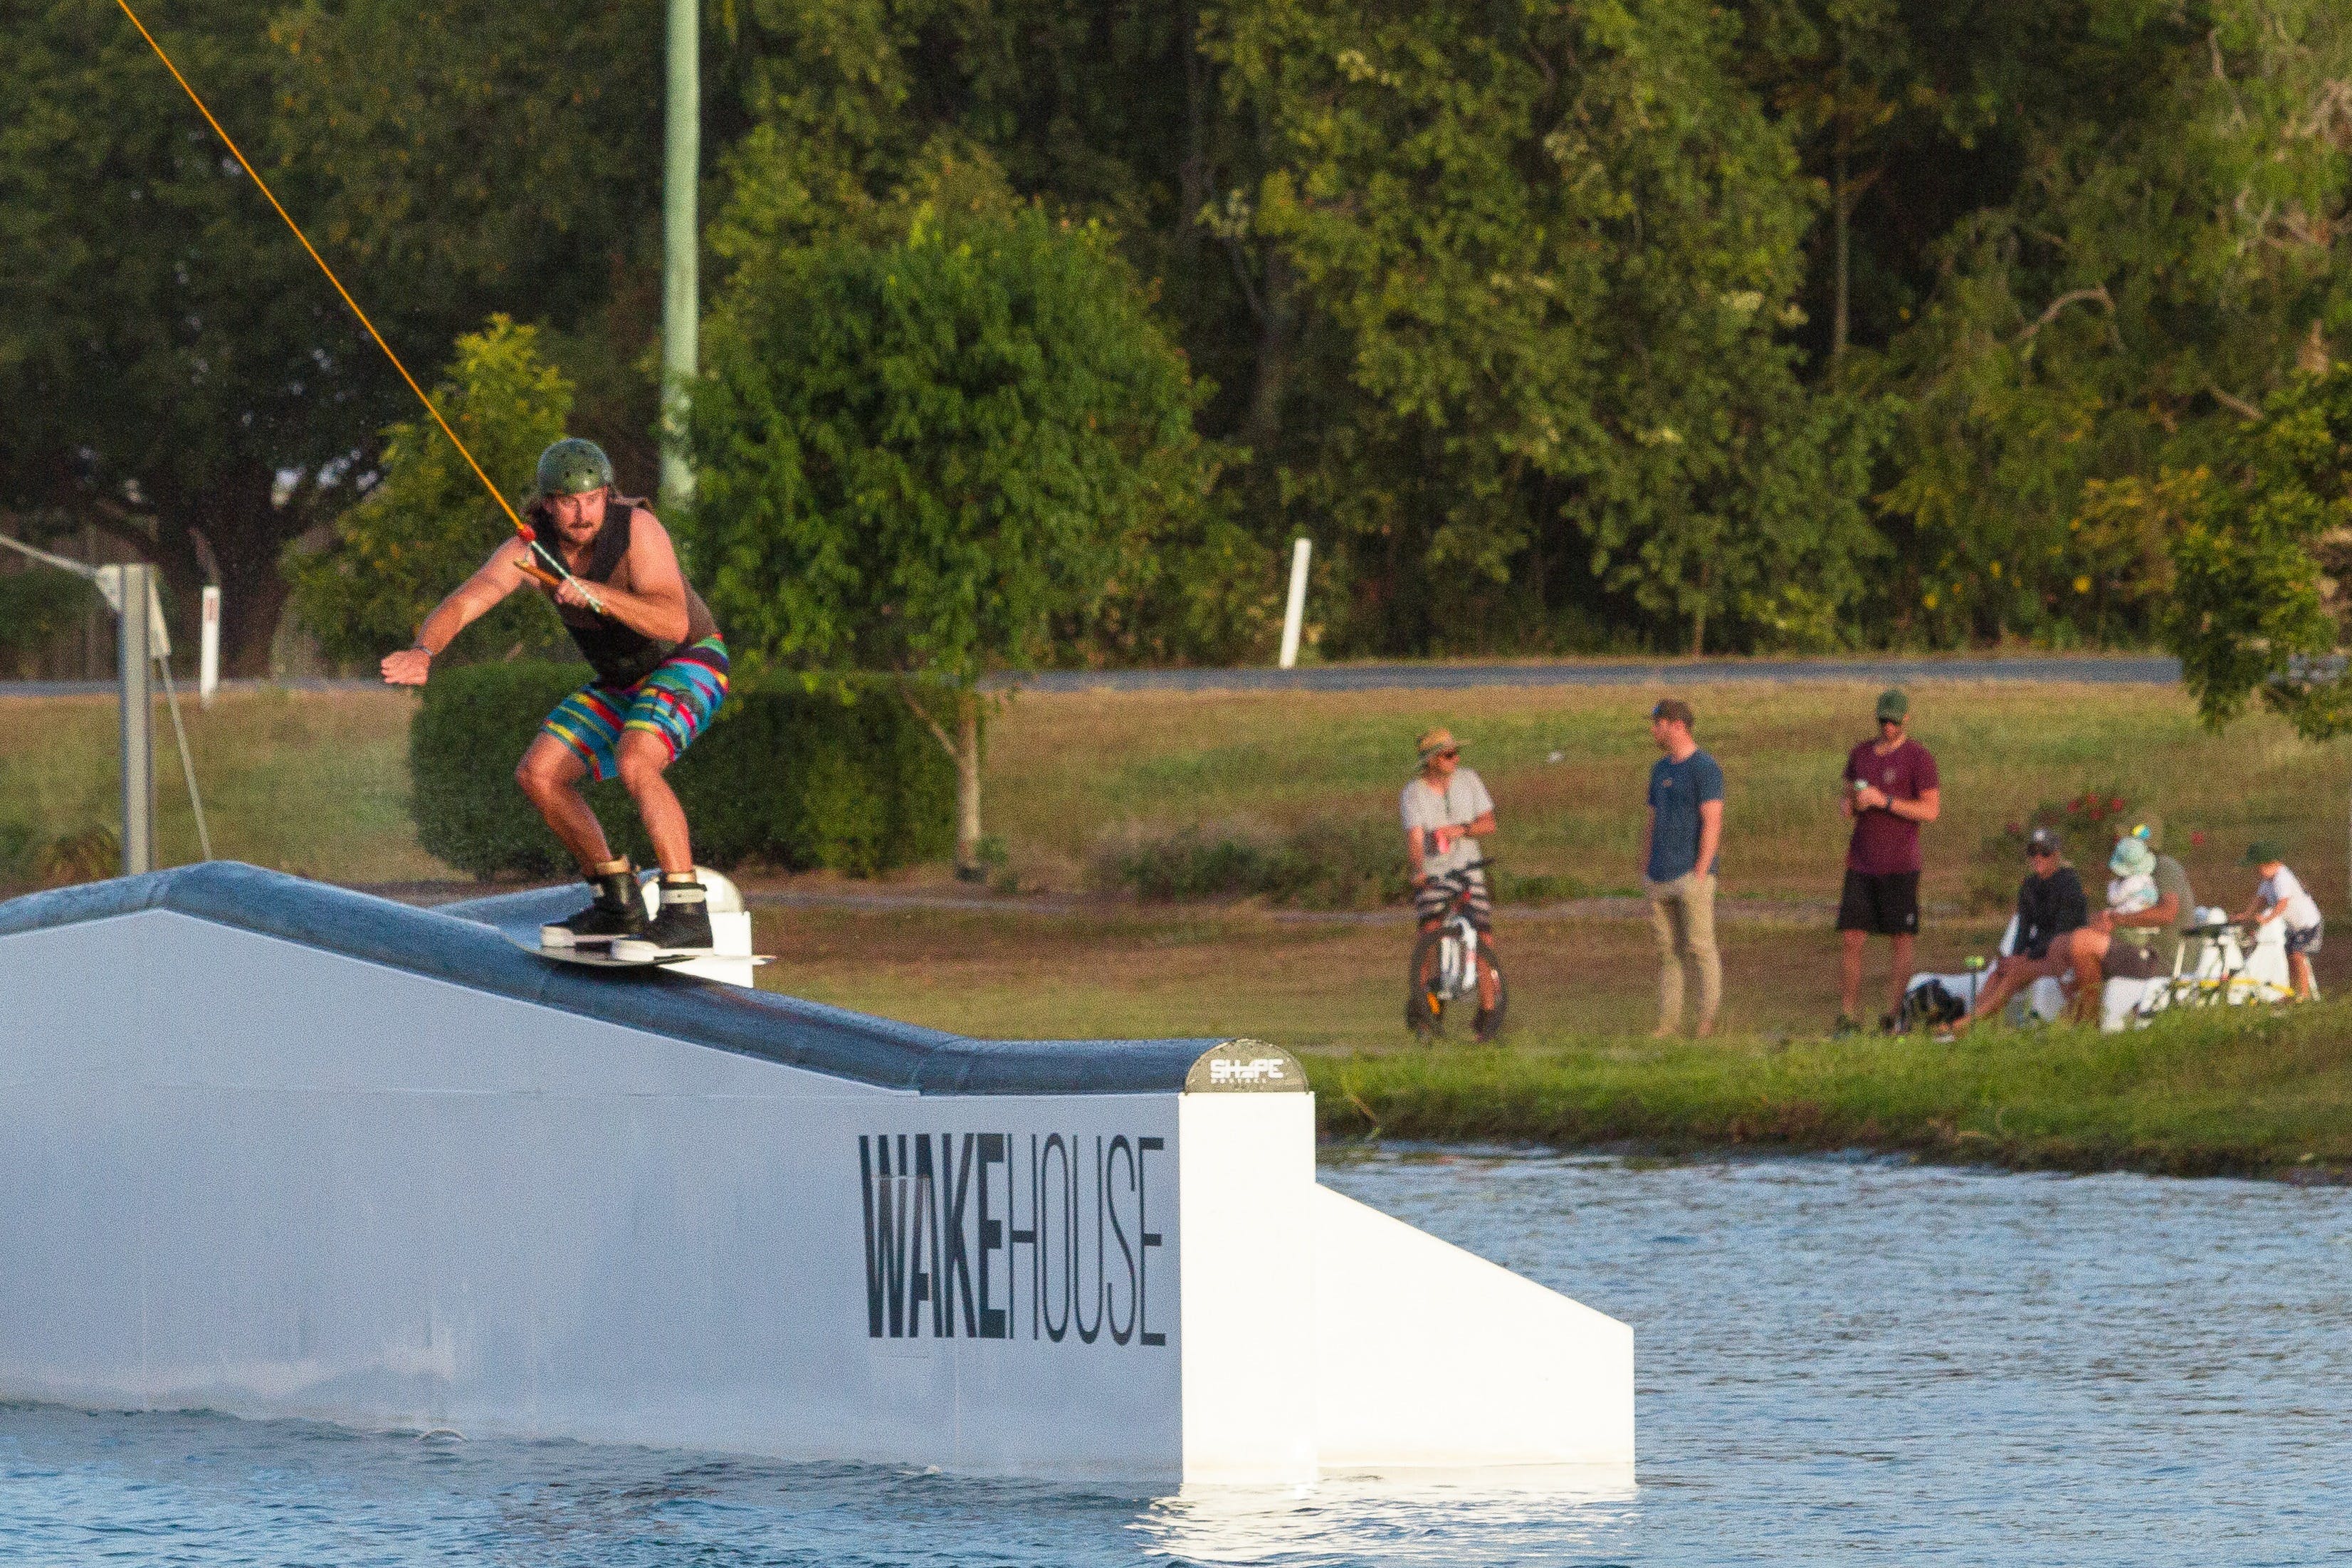 Cash for Tricks - Wakeboarding Comp - Perisher Accommodation